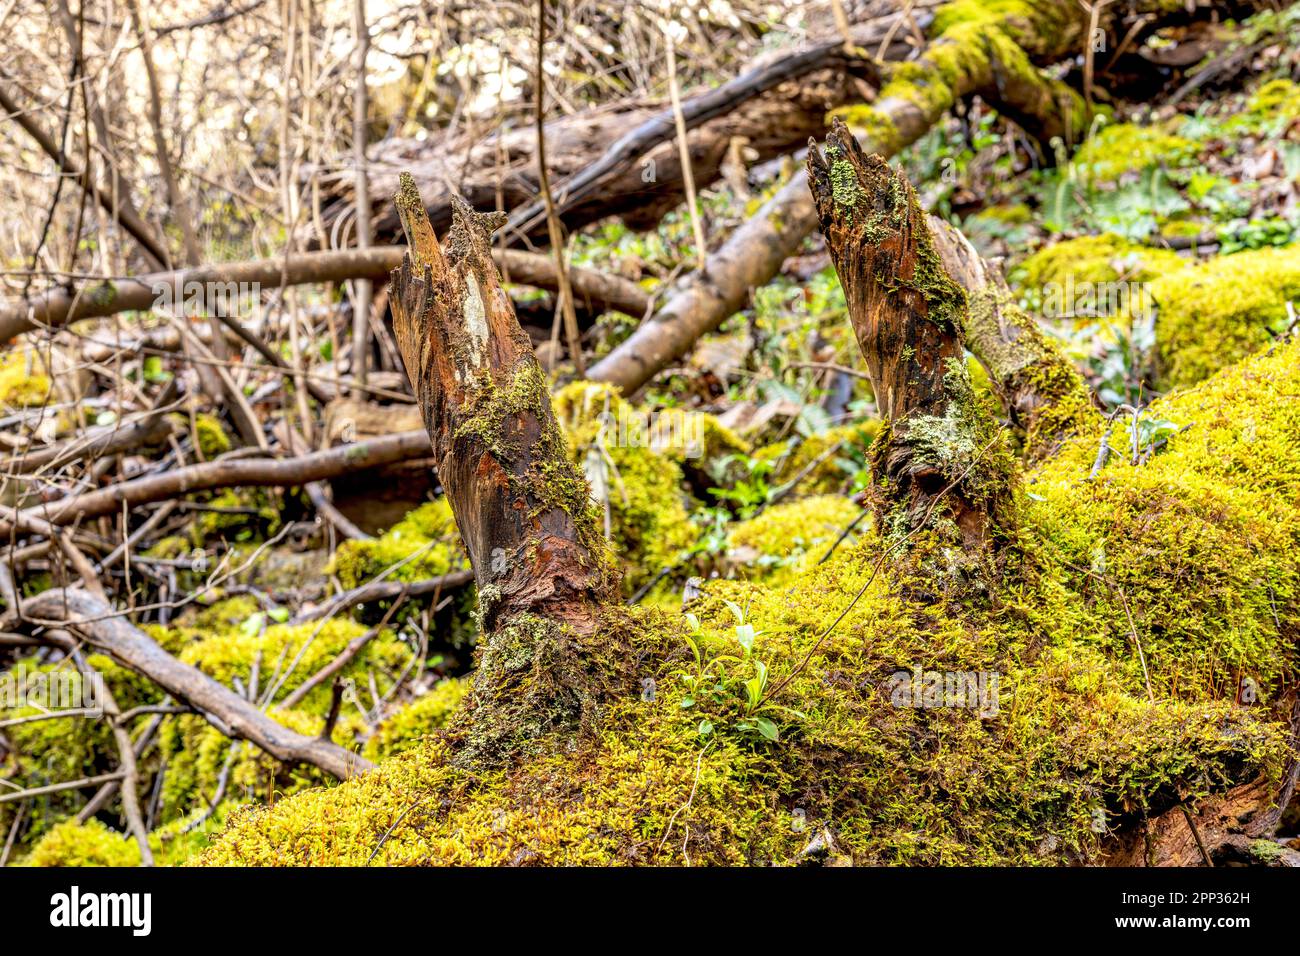 Boulders covered in bright green moss show the effects of erosion, fallen trees and ruggedness of a Tennessee forest. Stock Photo